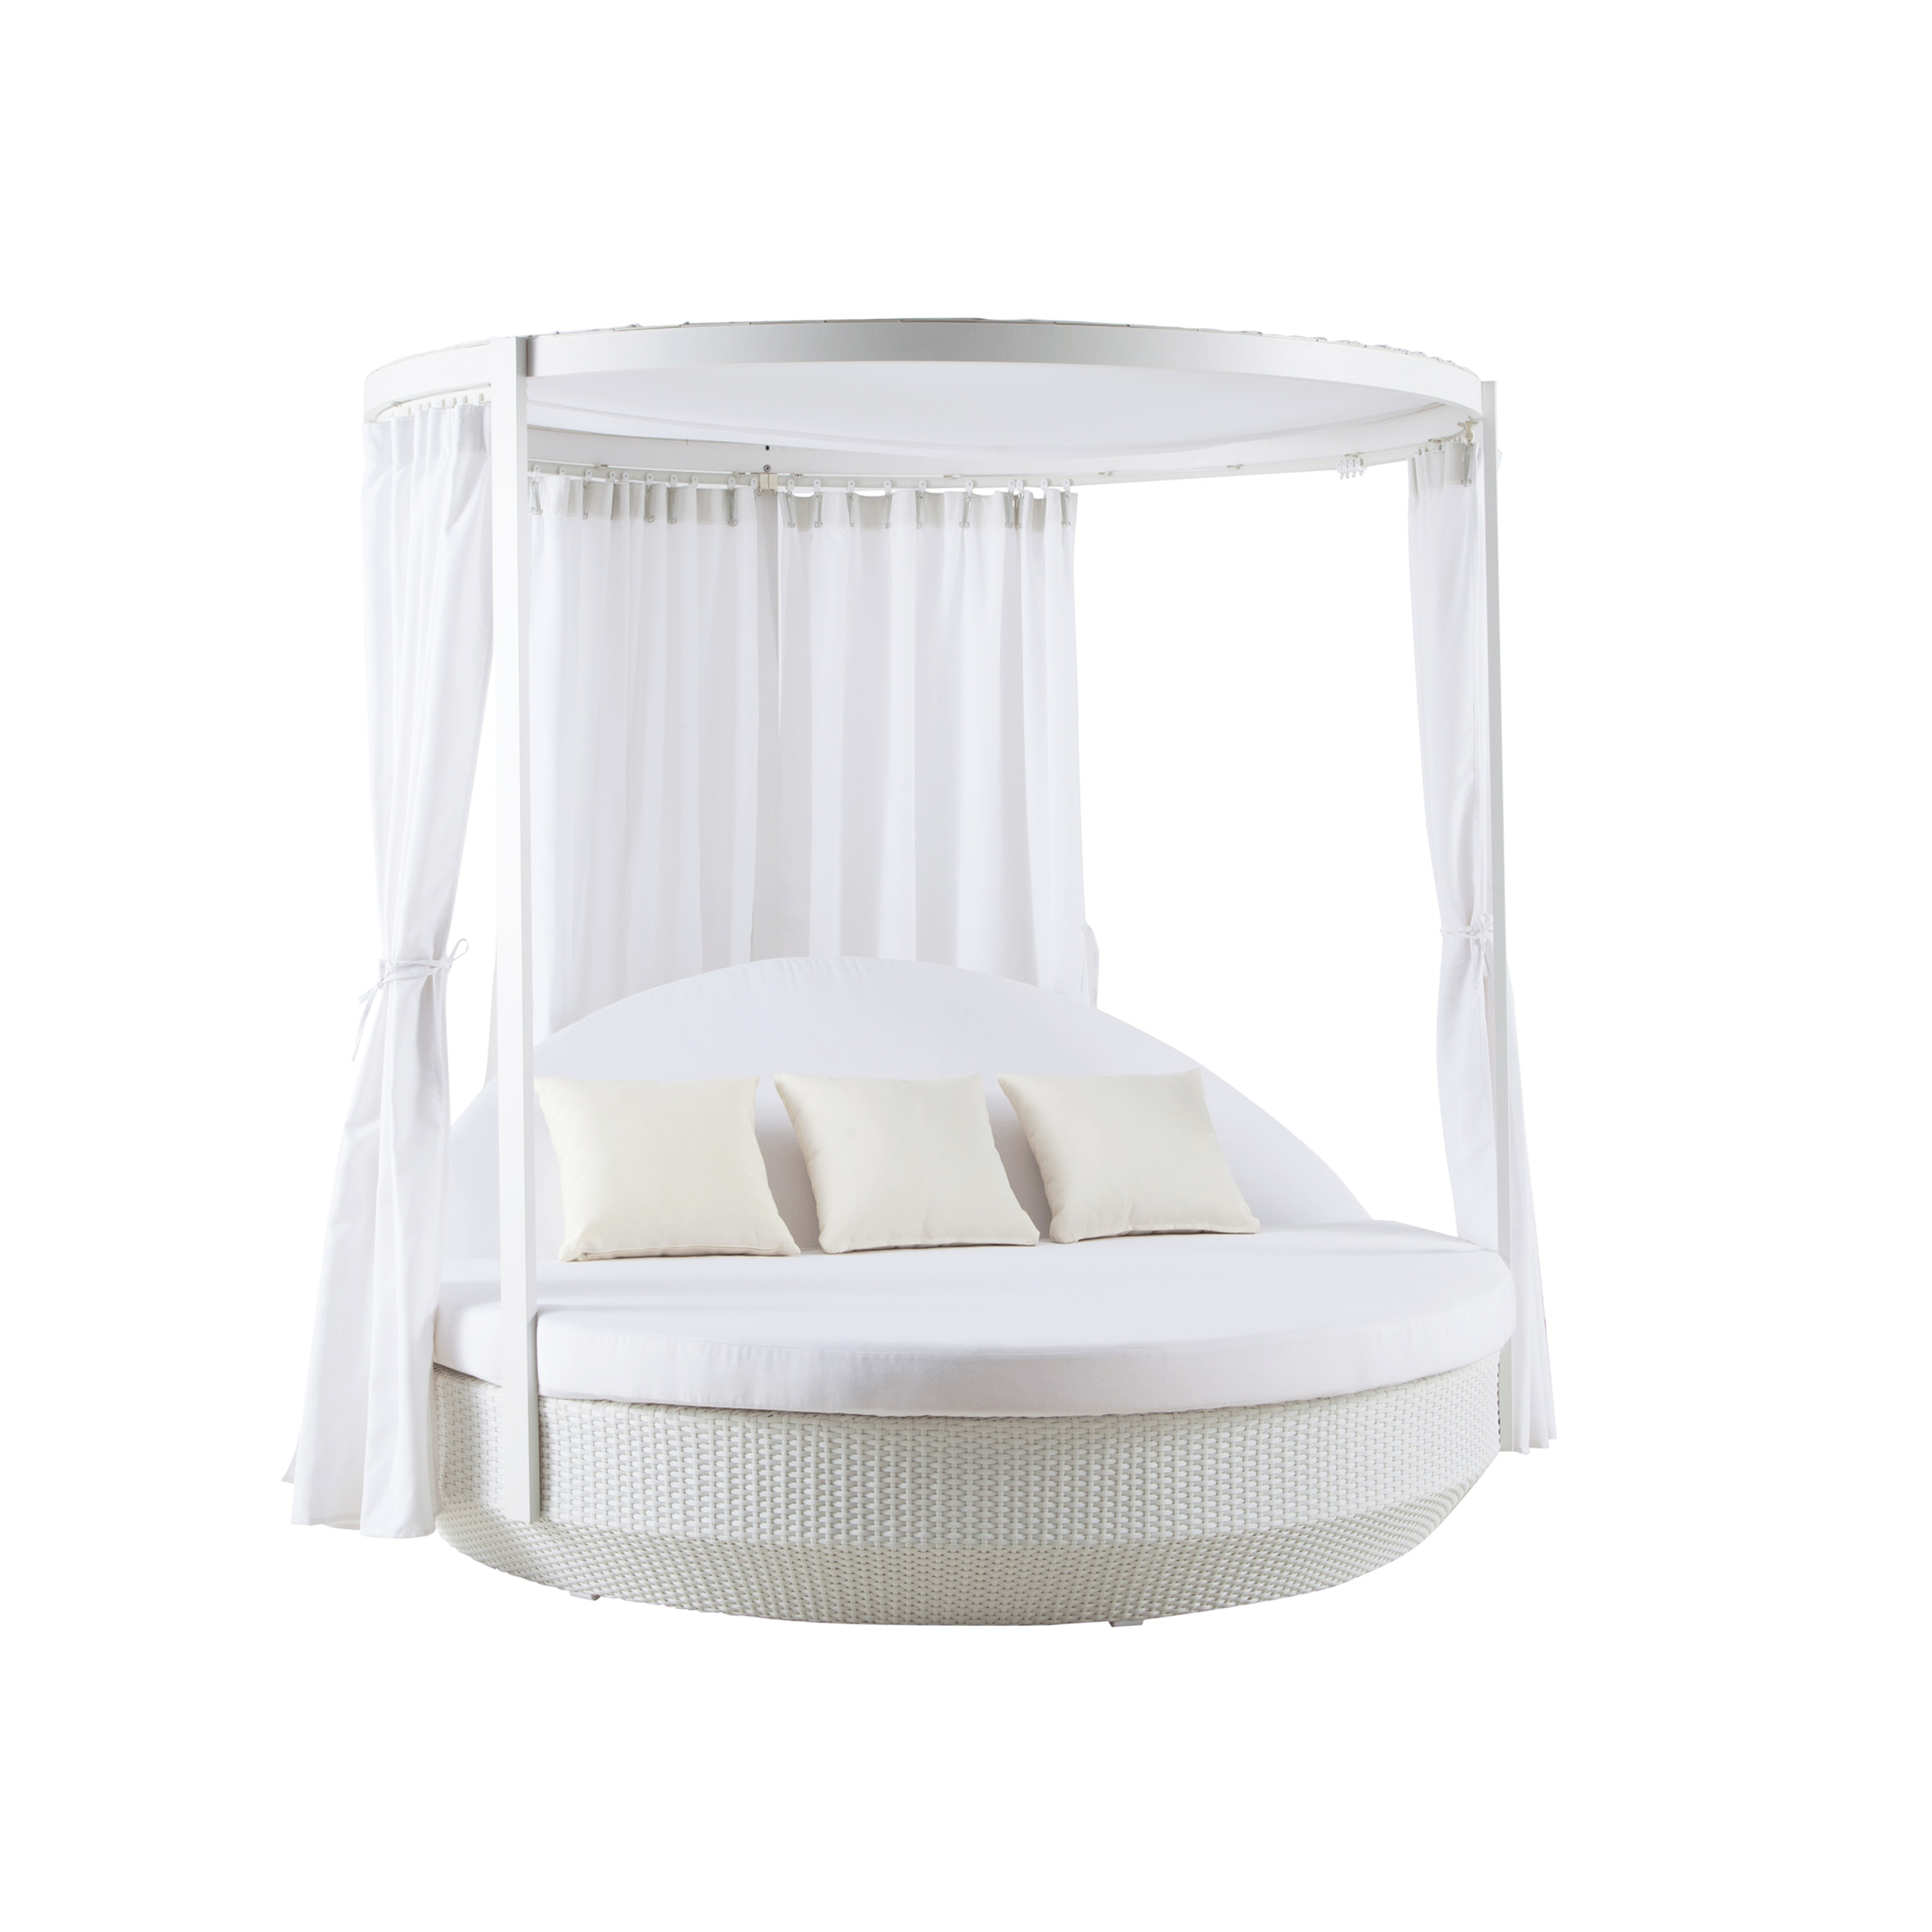 Paradise rattan daybed with curtain S2